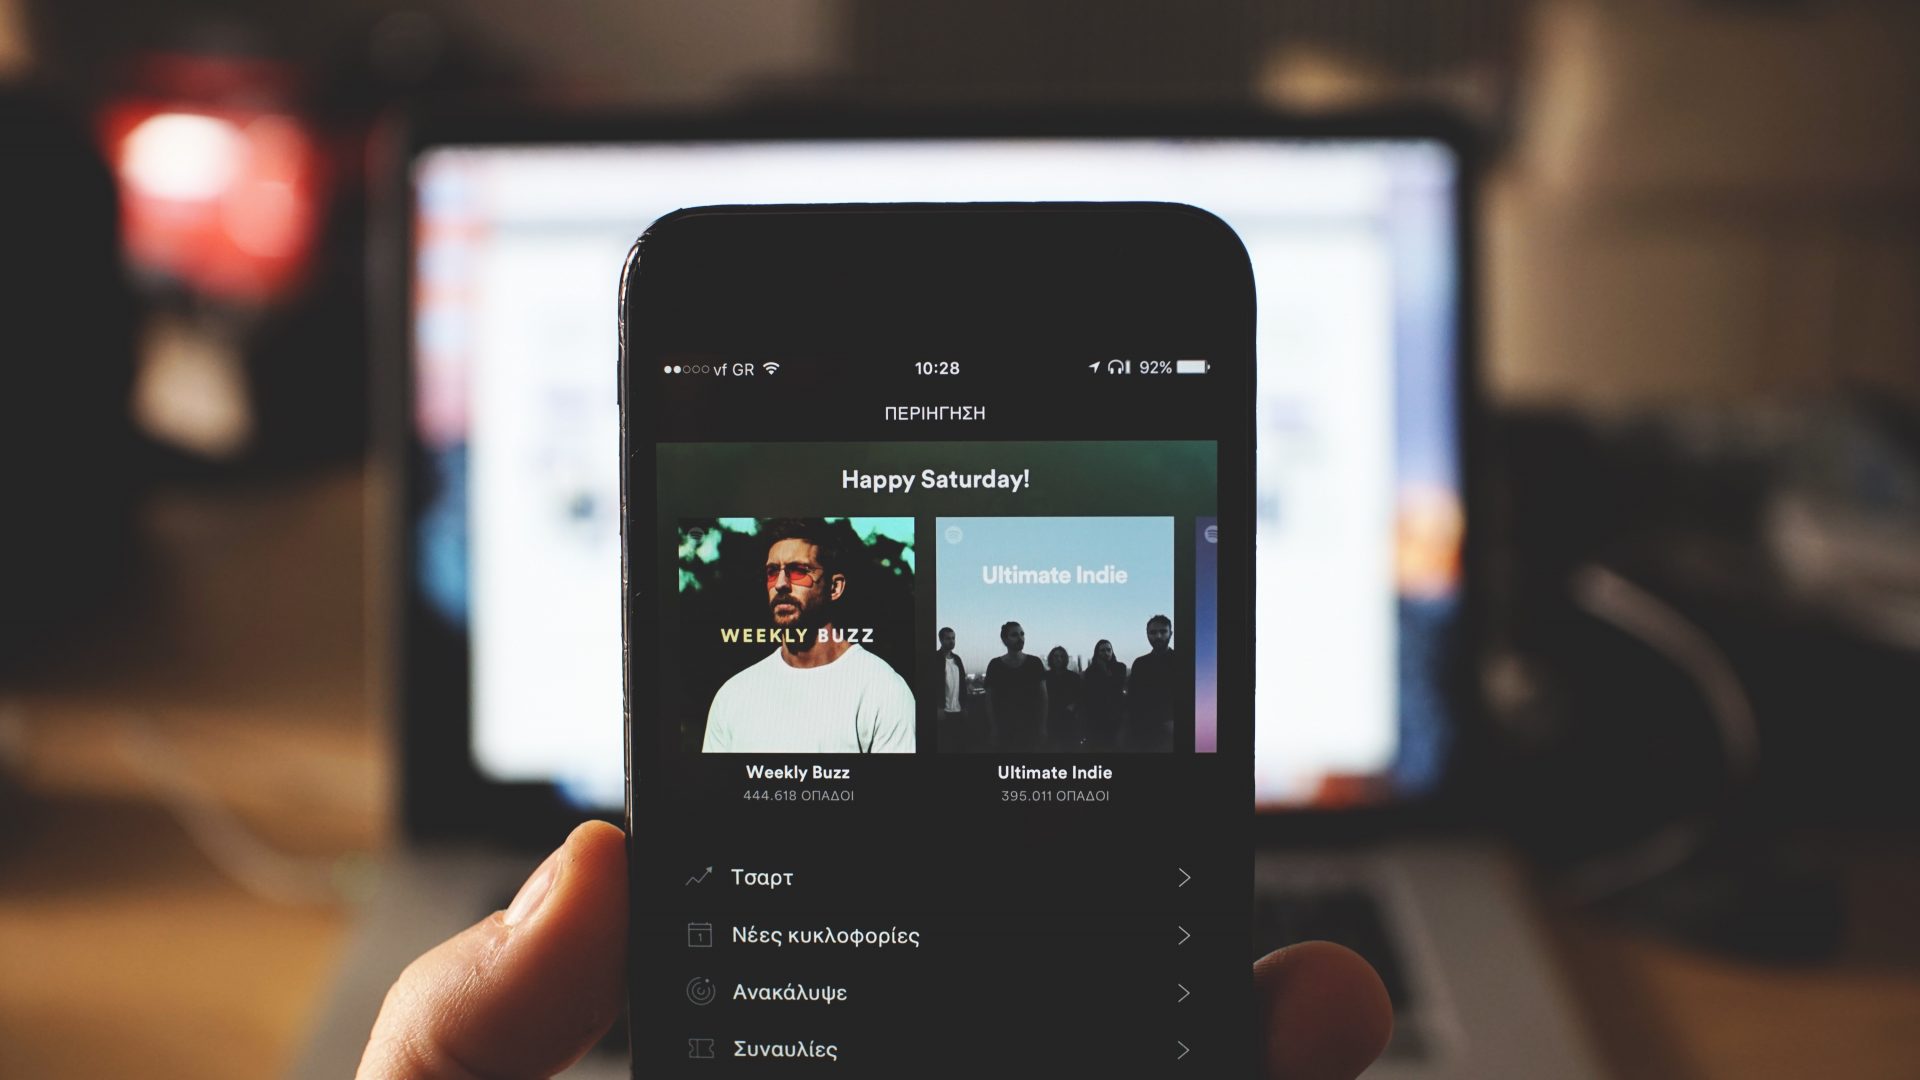 Latin America and Asia Drives Growth for Spotify in Q1 2020